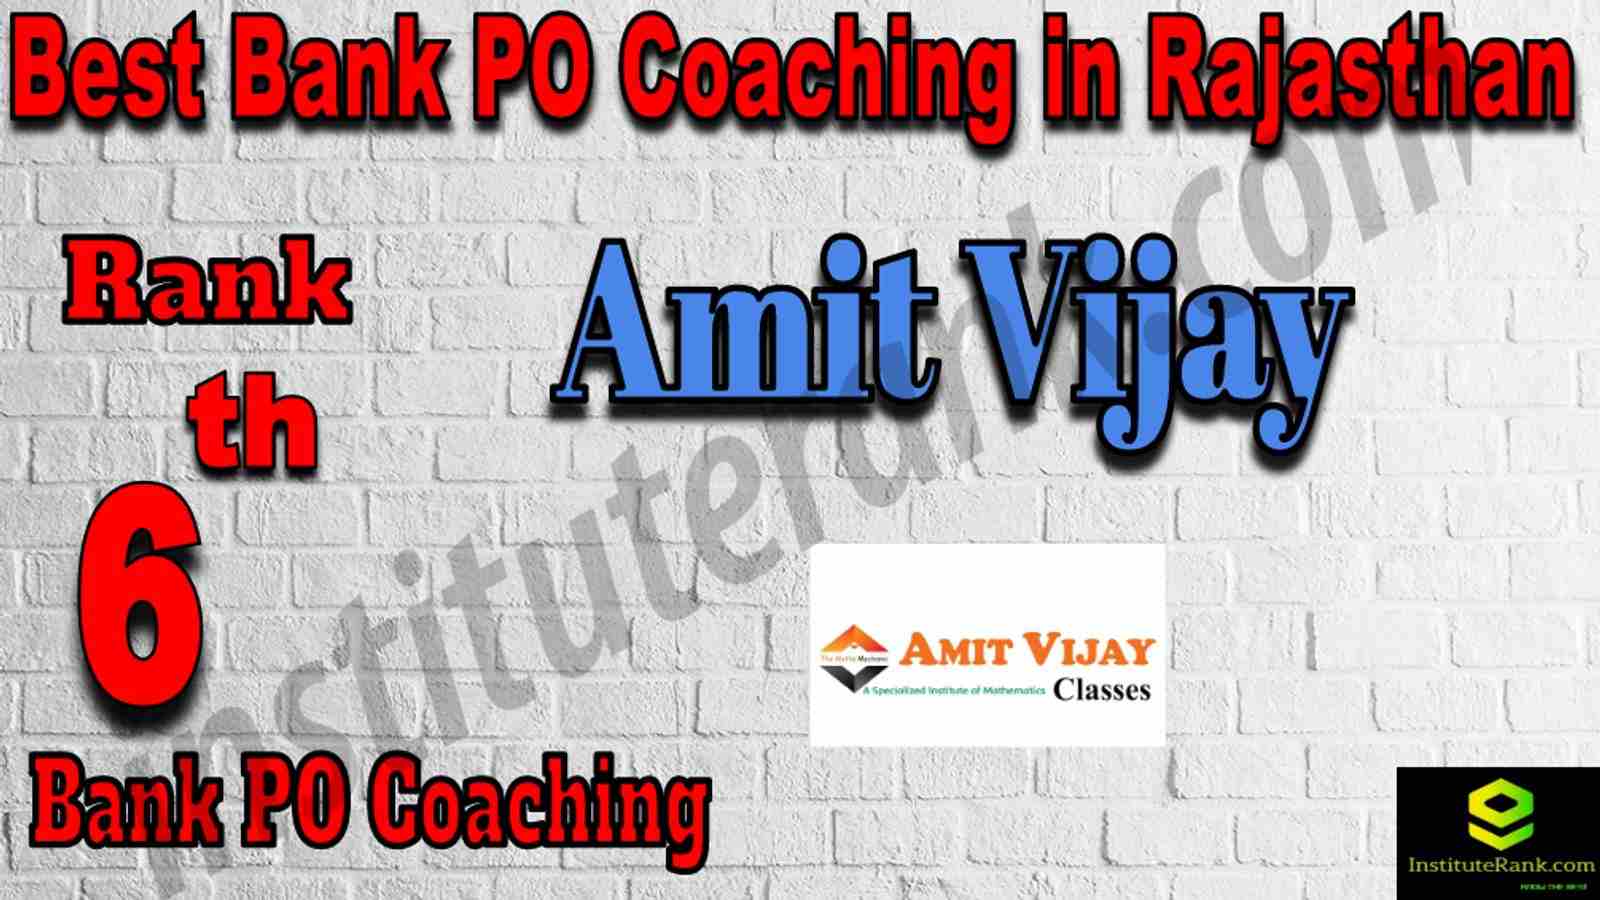 6th Best Bank PO Coaching in Rajasthan